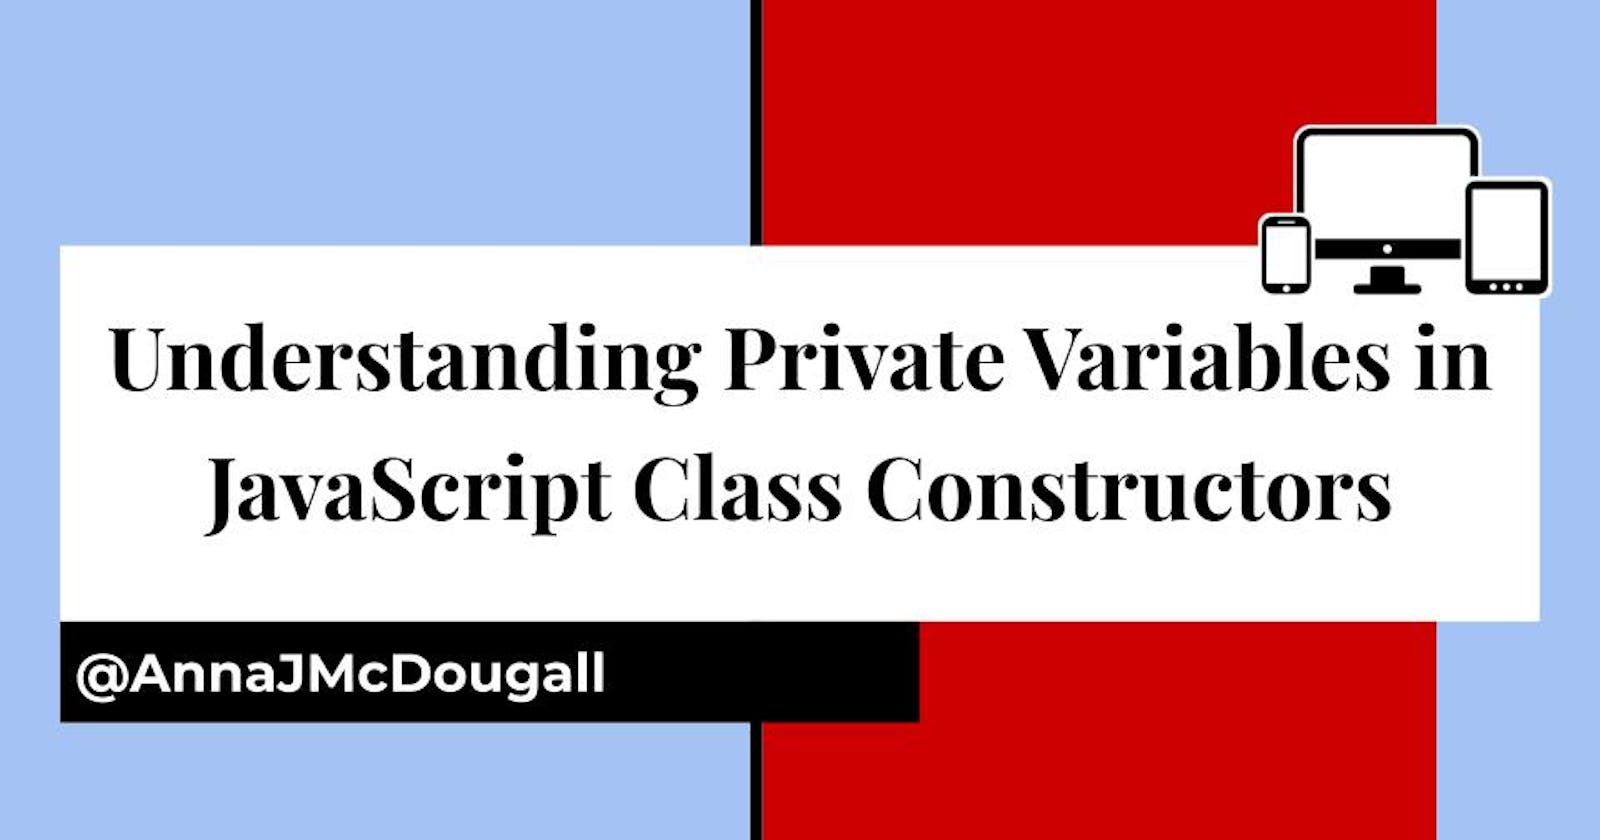 Understanding Private Variables in JavaScript Class Constructors